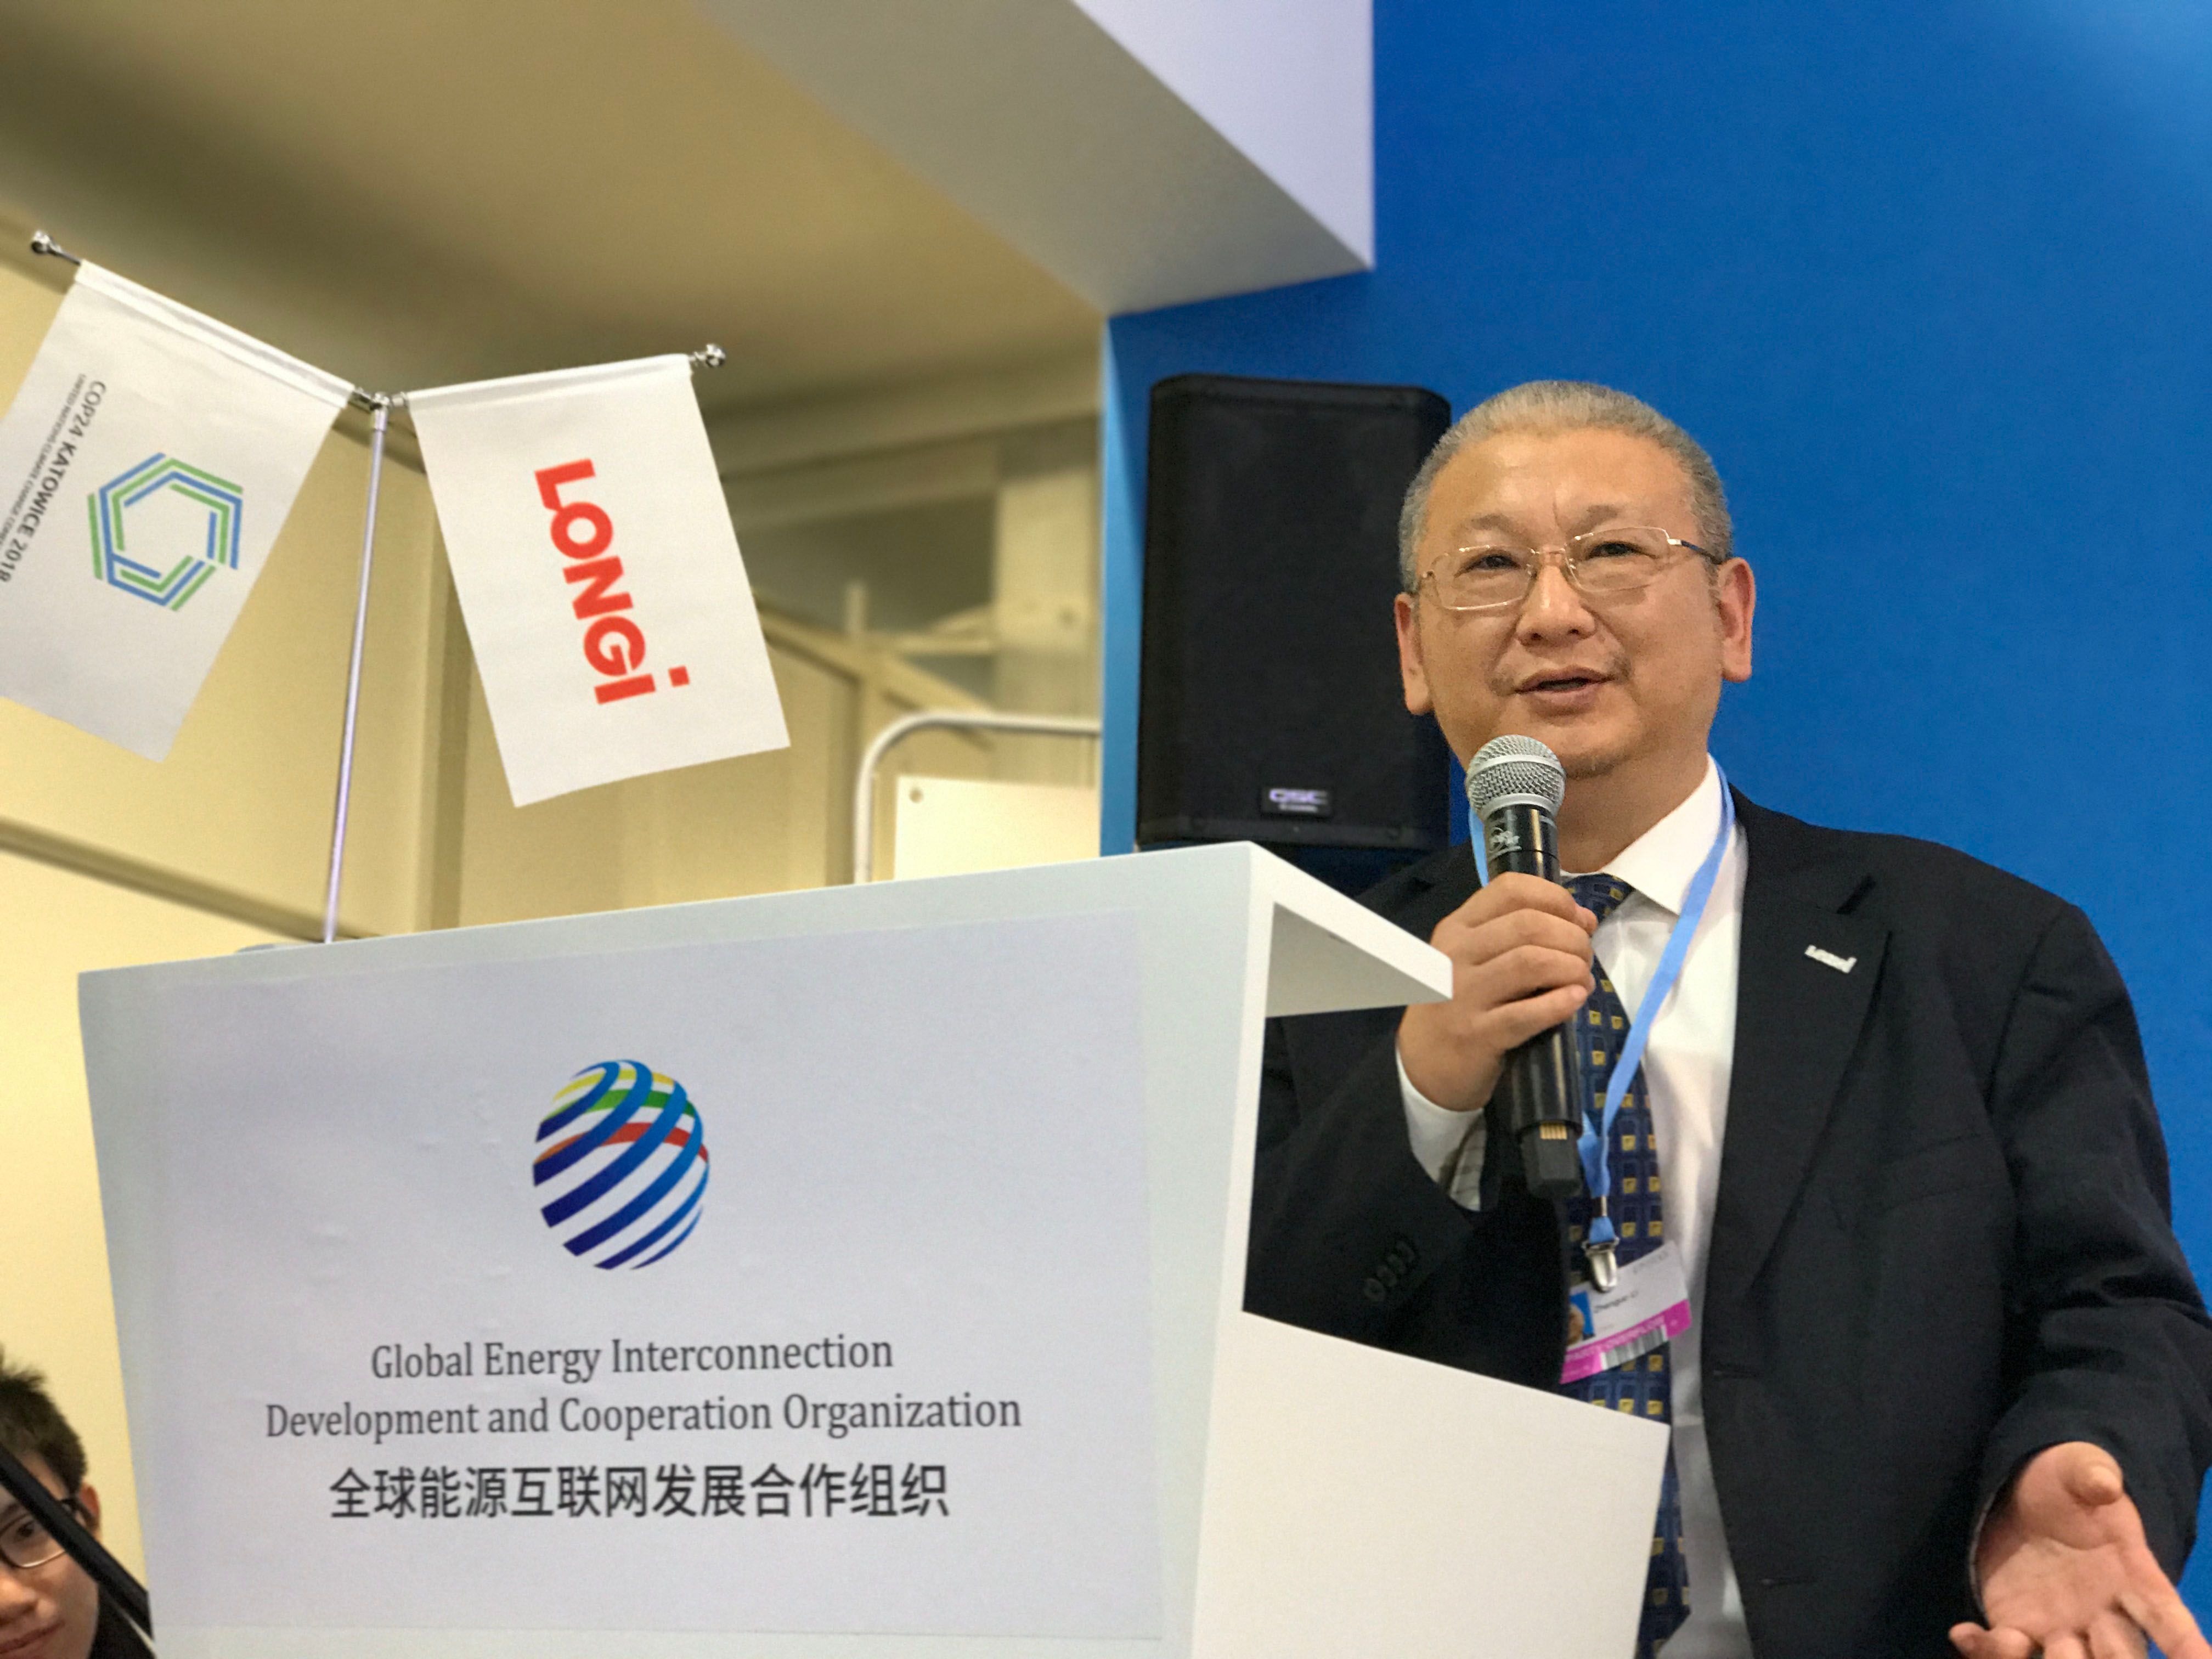 LI Zhenguo, founder and President of LONGi Group, was invited to attend the 24th United Nations Climate Change Conference and made a keynote speech.